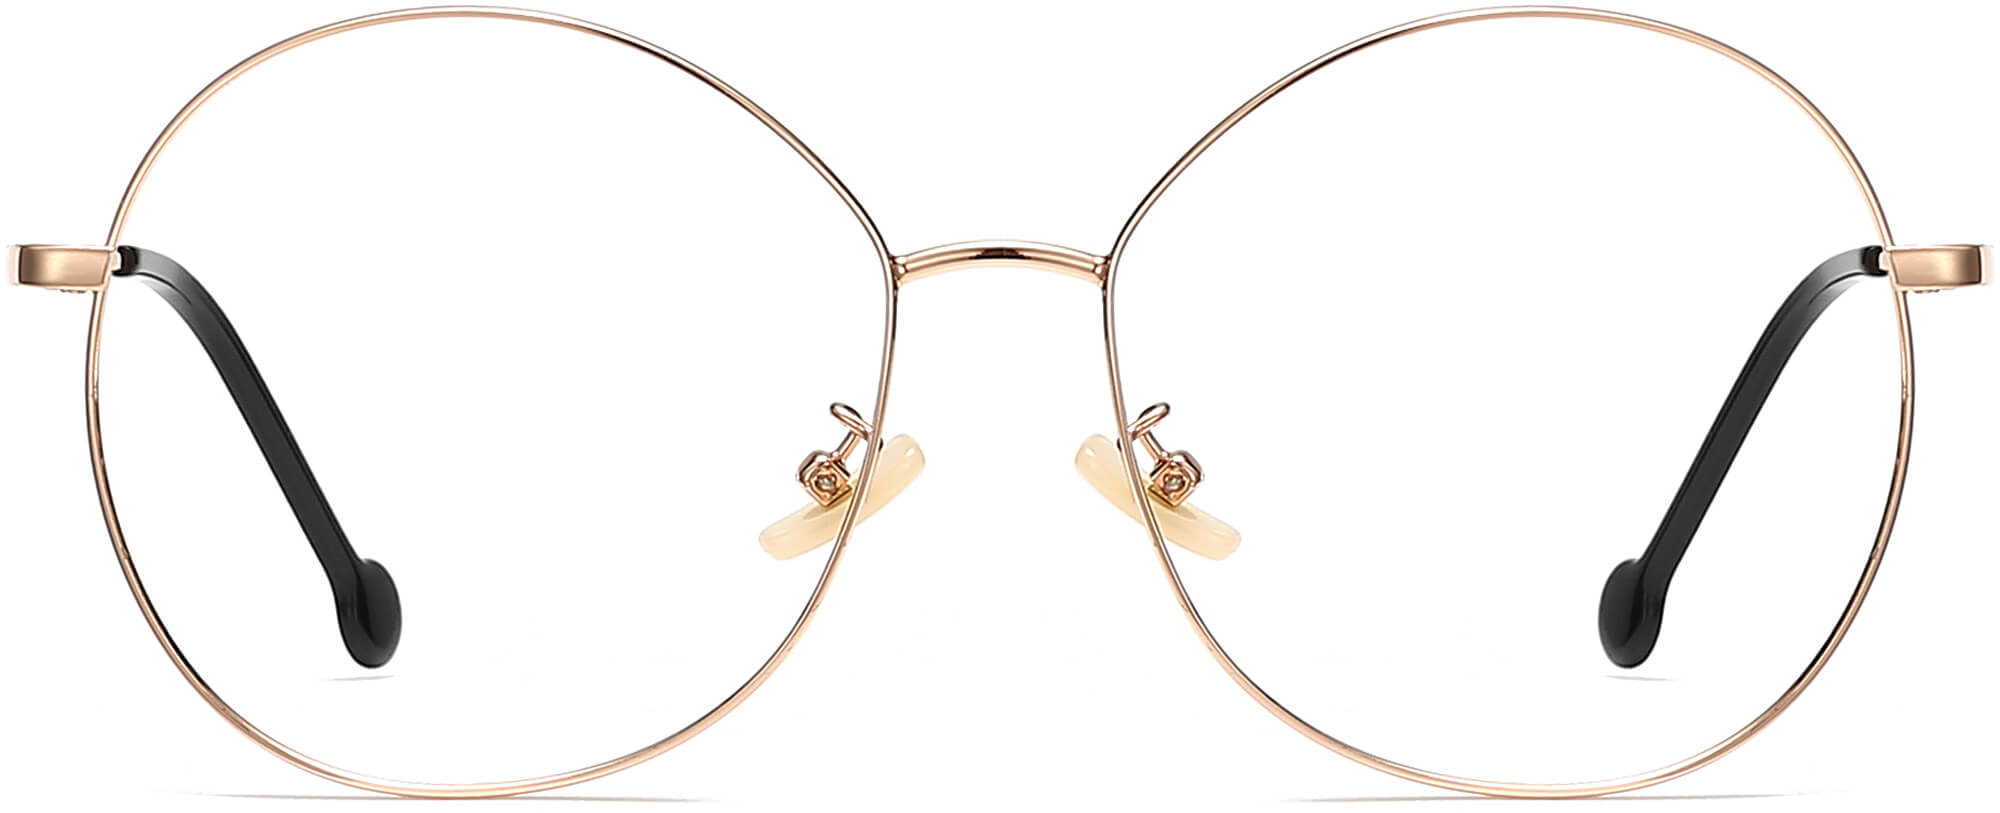 Celeste Round Gold Eyeglasses from ANRRI, front view